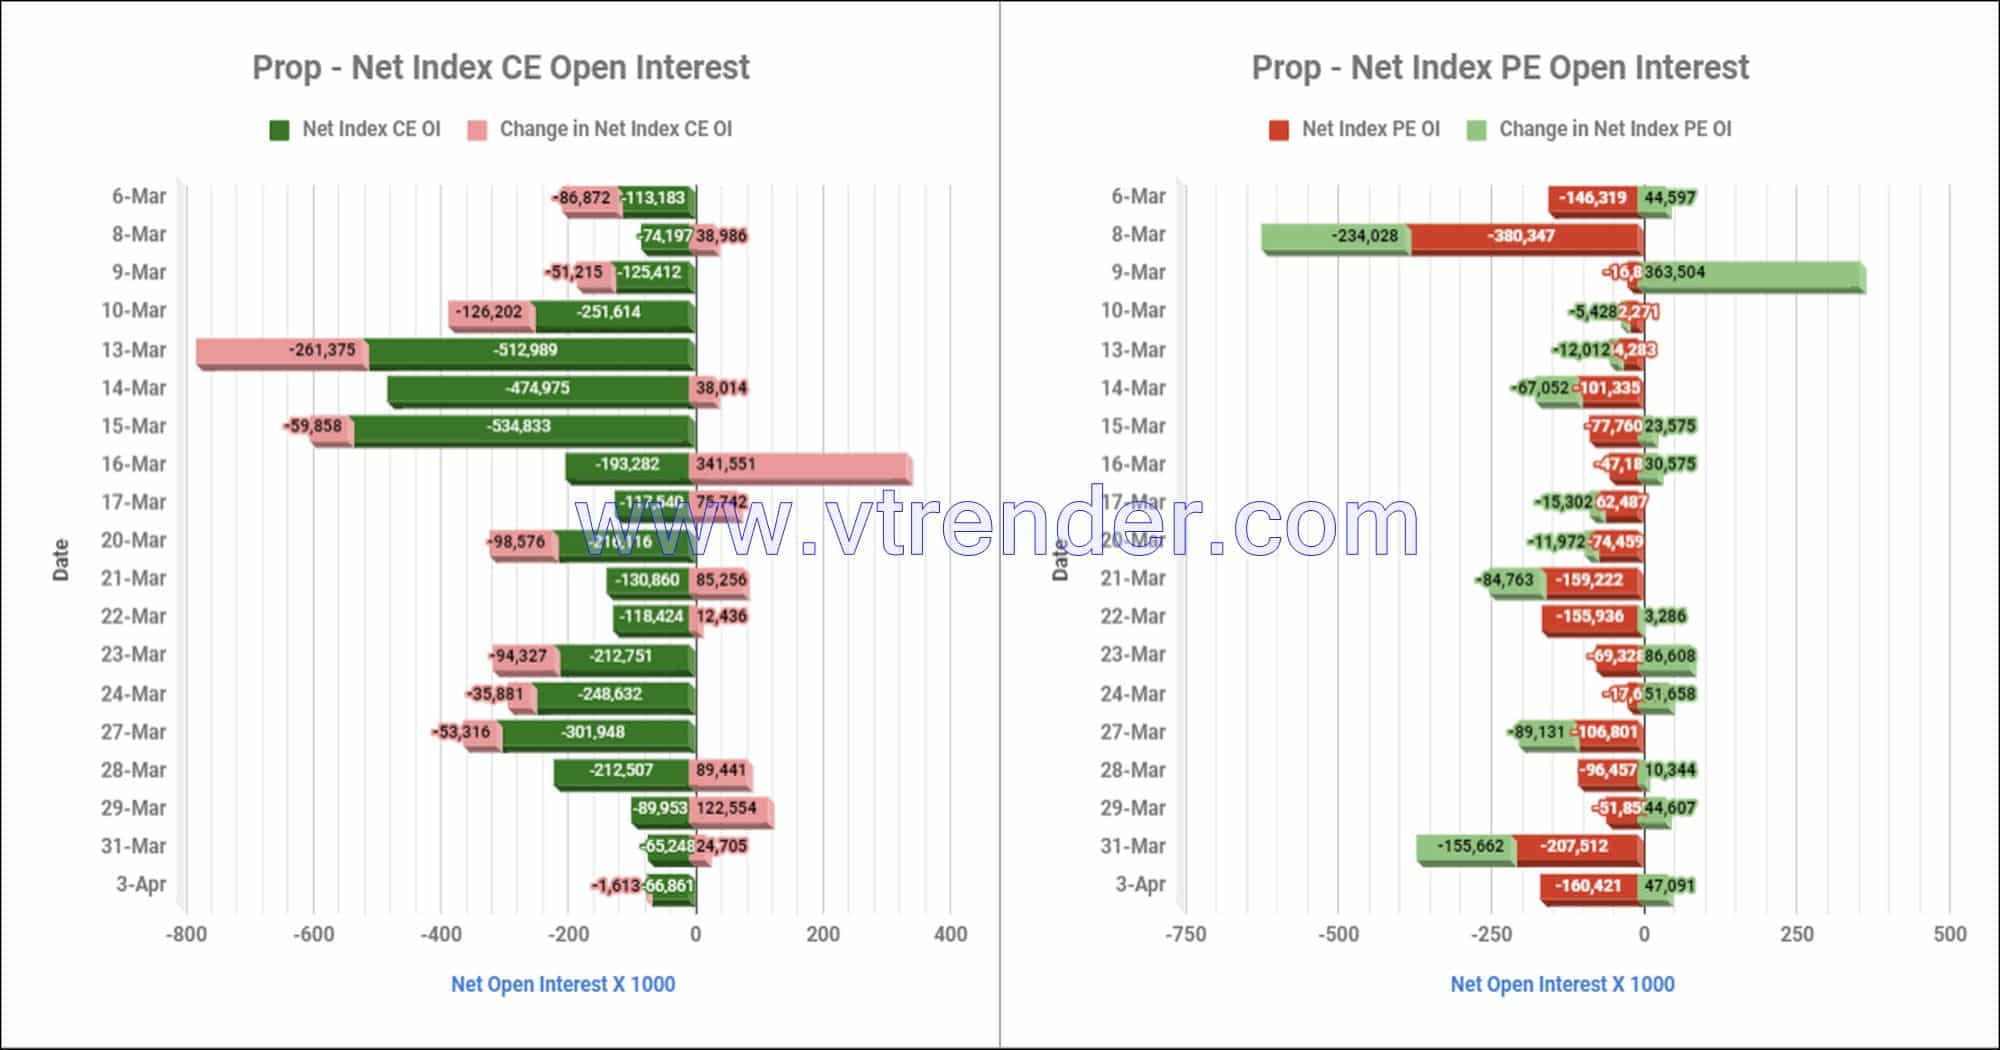 Proinop03Apr Participantwise Net Open Interest And Net Equity Investments – 3Rd Apr 2023 Client, Equity, Fii, Index Futures, Index Options, Open Interest, Prop